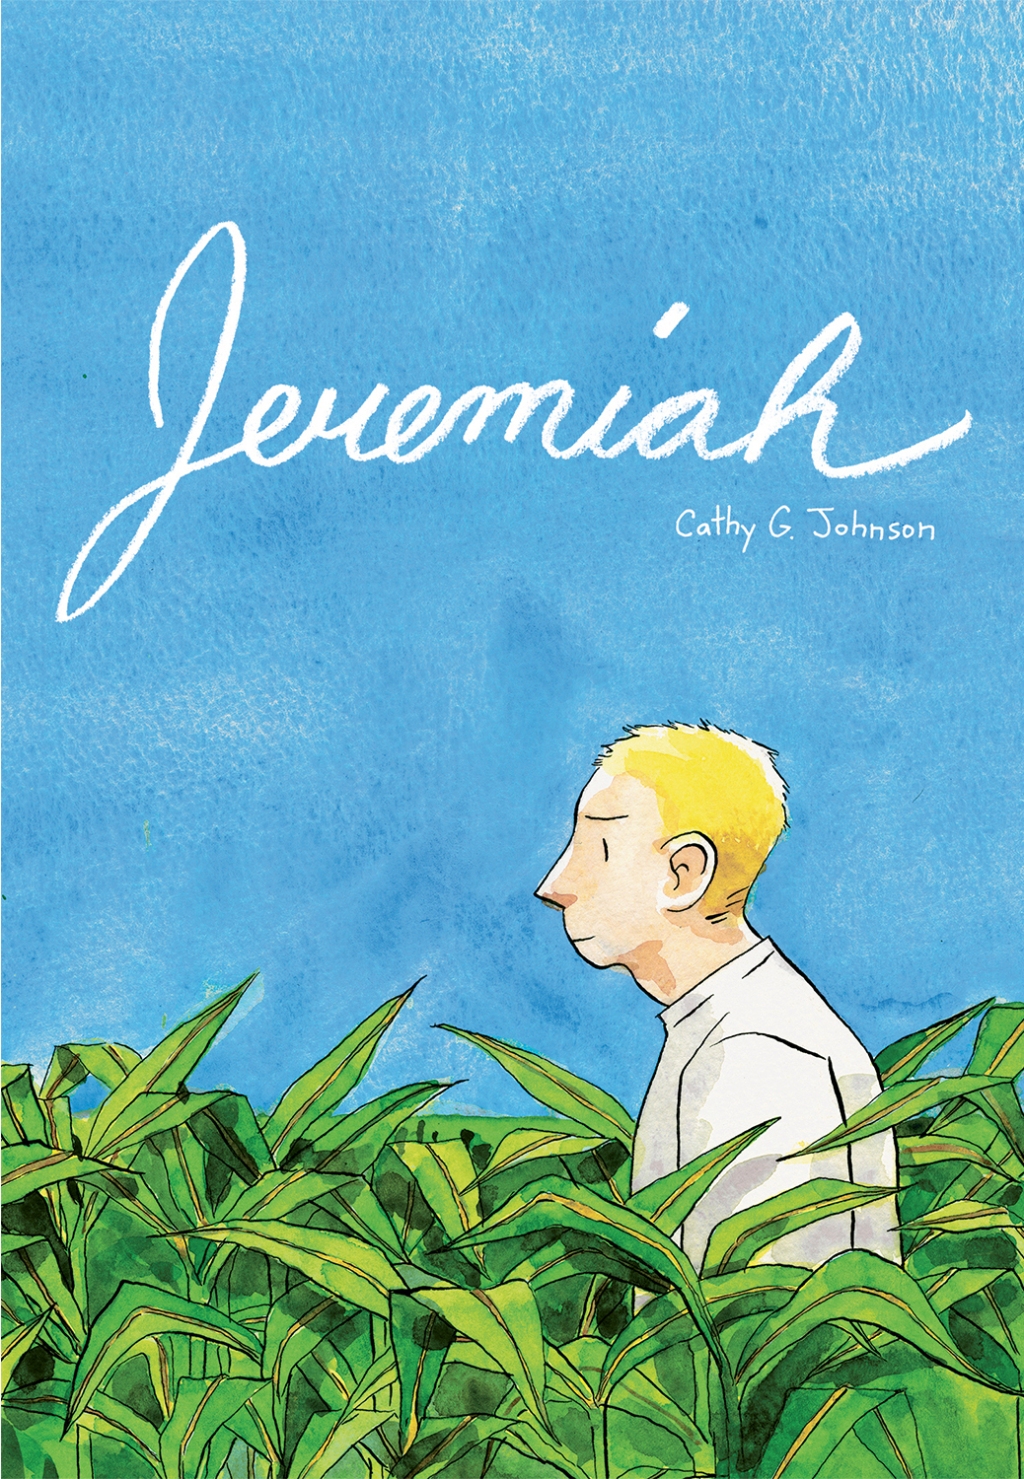 Jeremiah in August from AdHouse Books